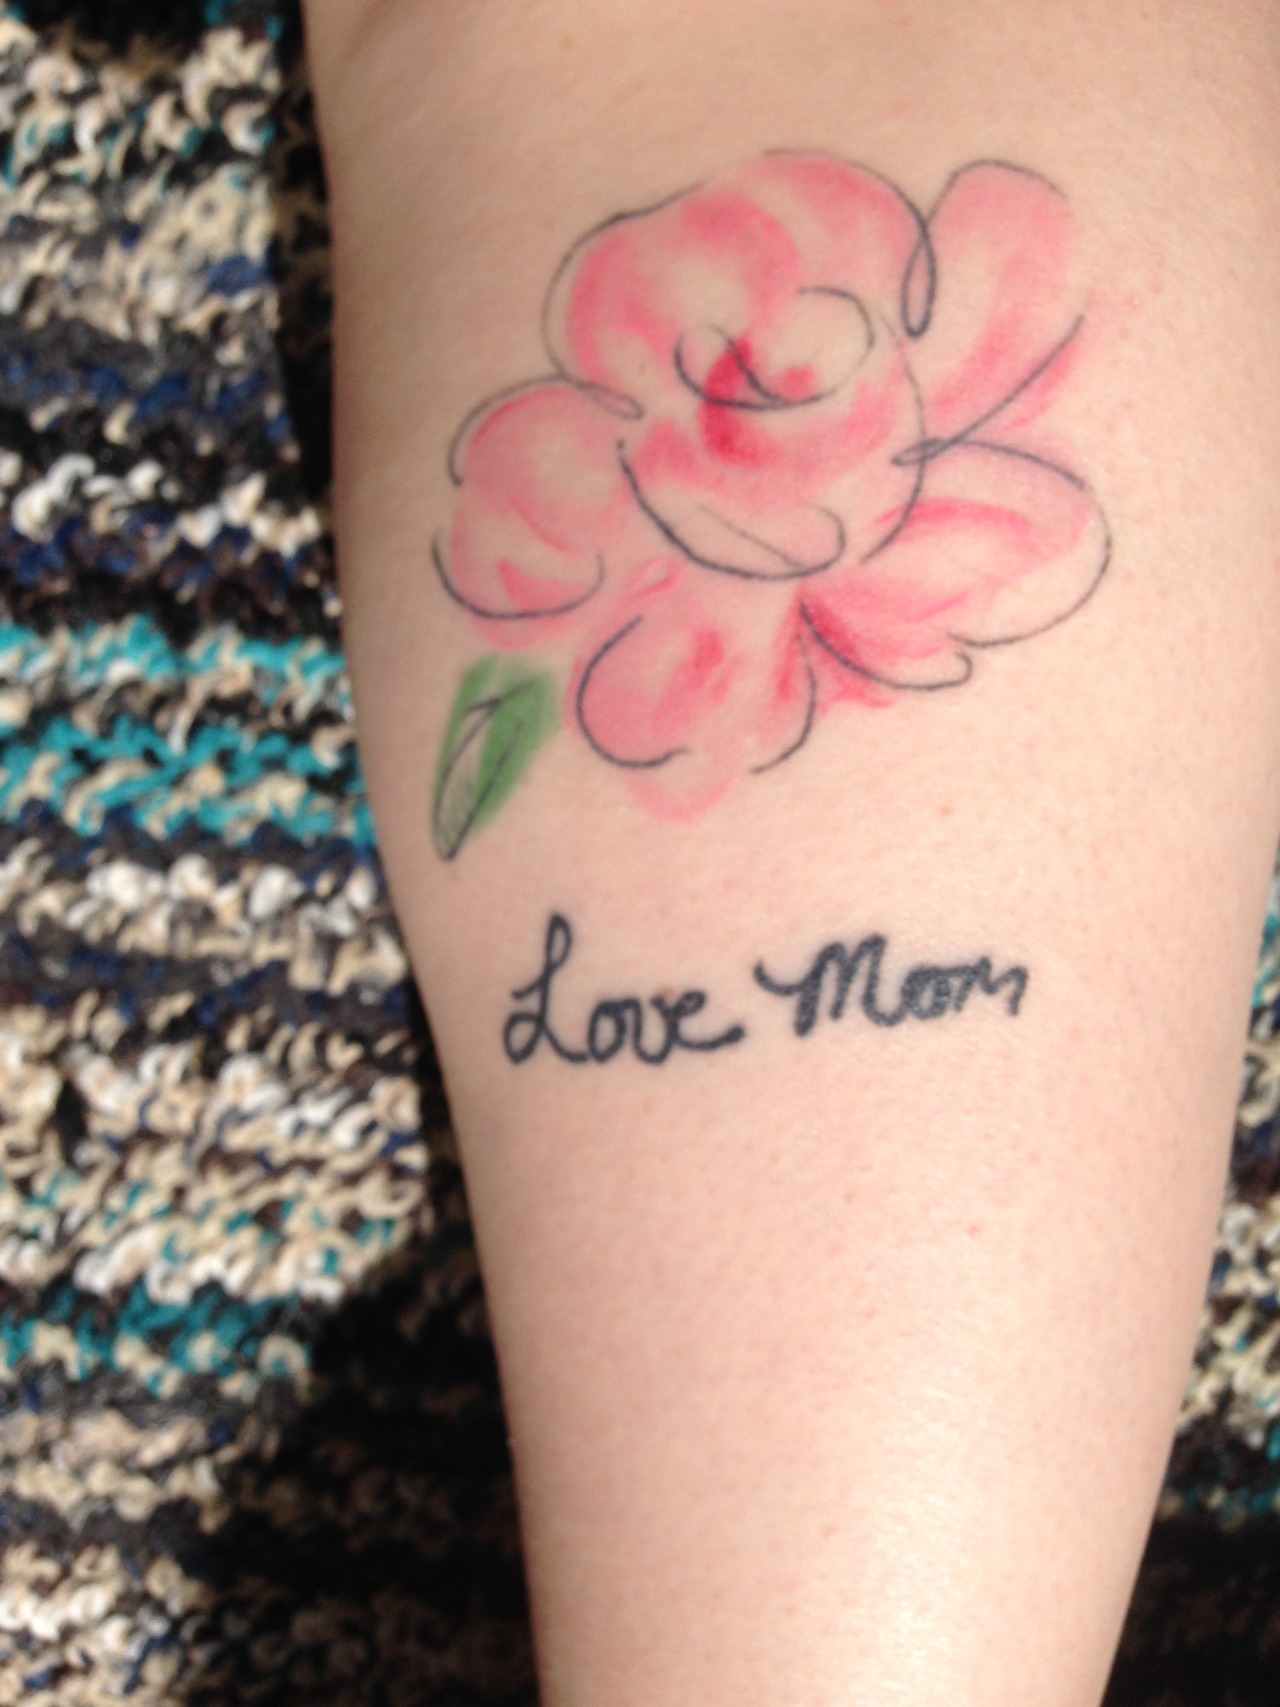 50 Brilliant Tattoo Ideas for Moms Who Want to Get Inked  CafeMomcom